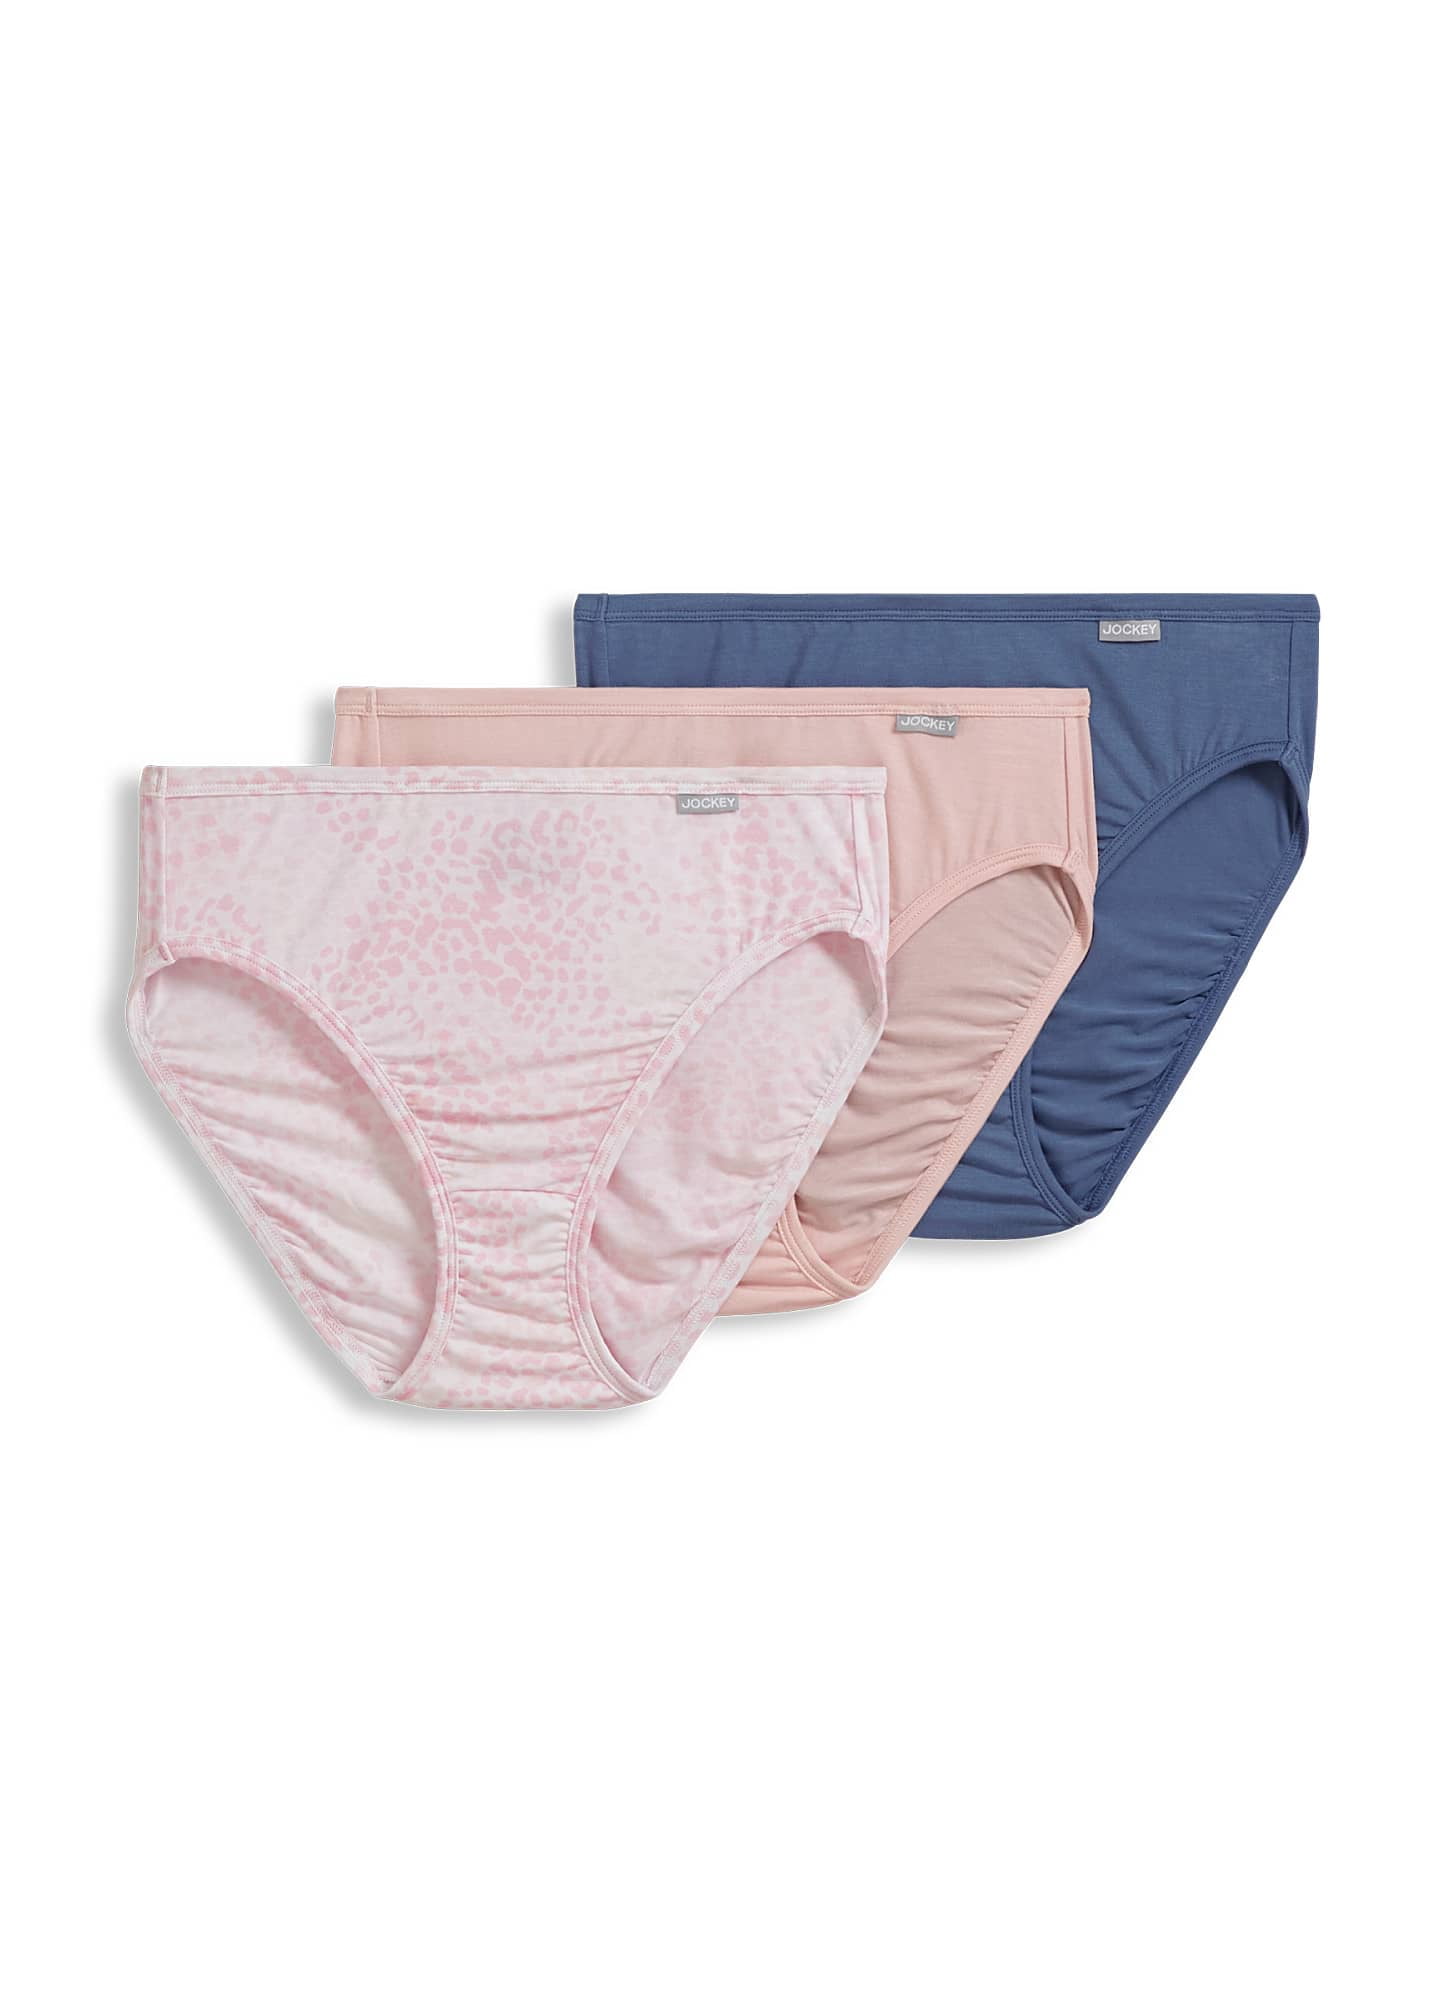 Jockey Classic French Cut Brief 3-Pack & Reviews